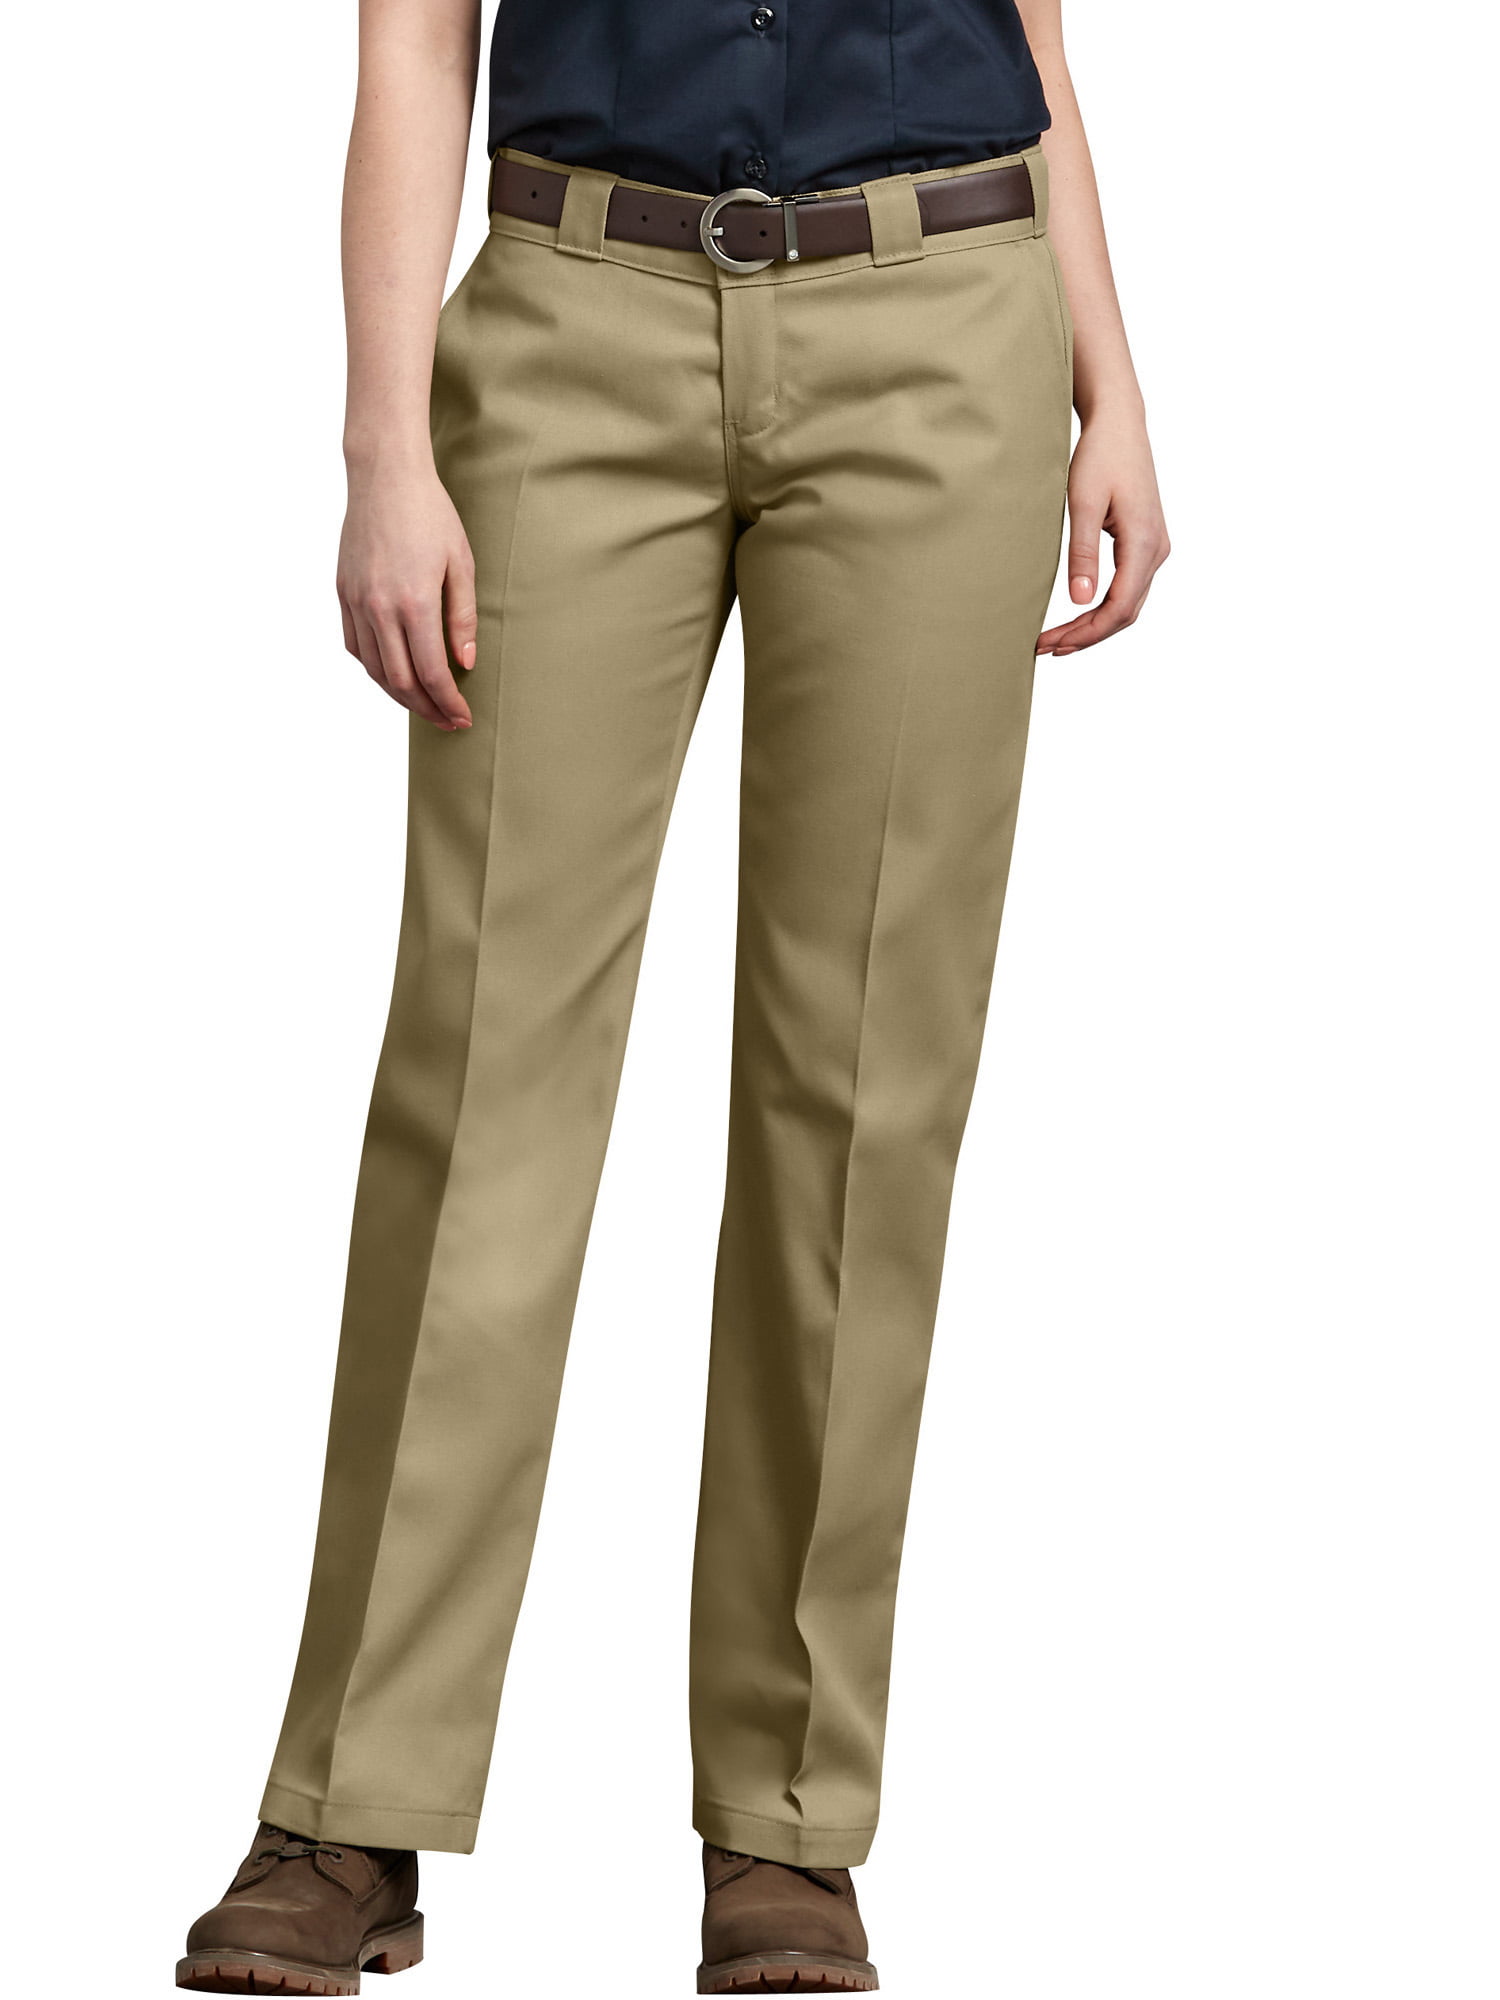 Edwards Lady 8678 Easy Fit Chino Uniform Pants Navy